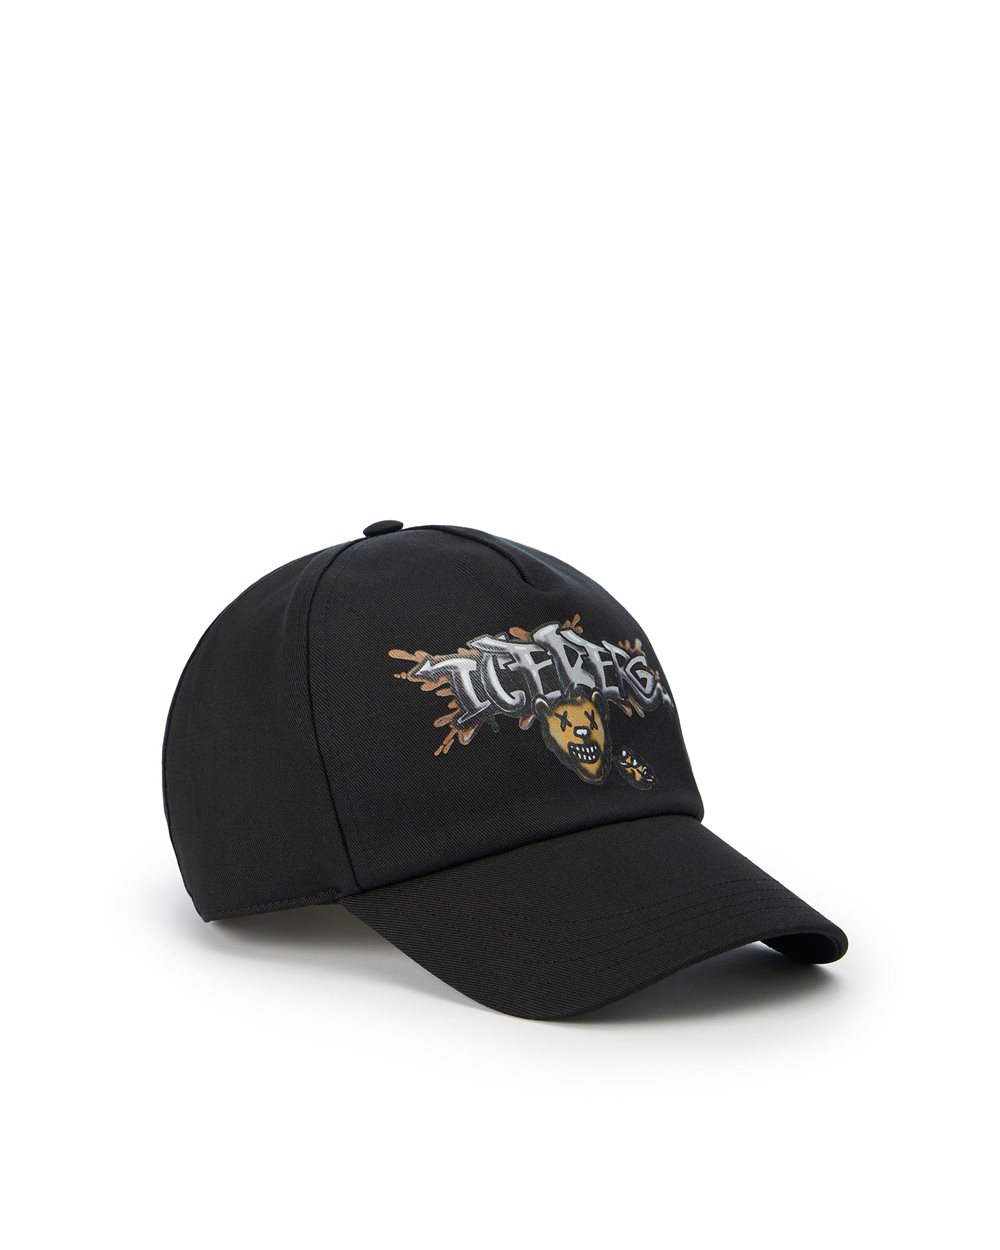 Baseball hat with cartoon graphics and logo - Hats  | Iceberg - Official Website